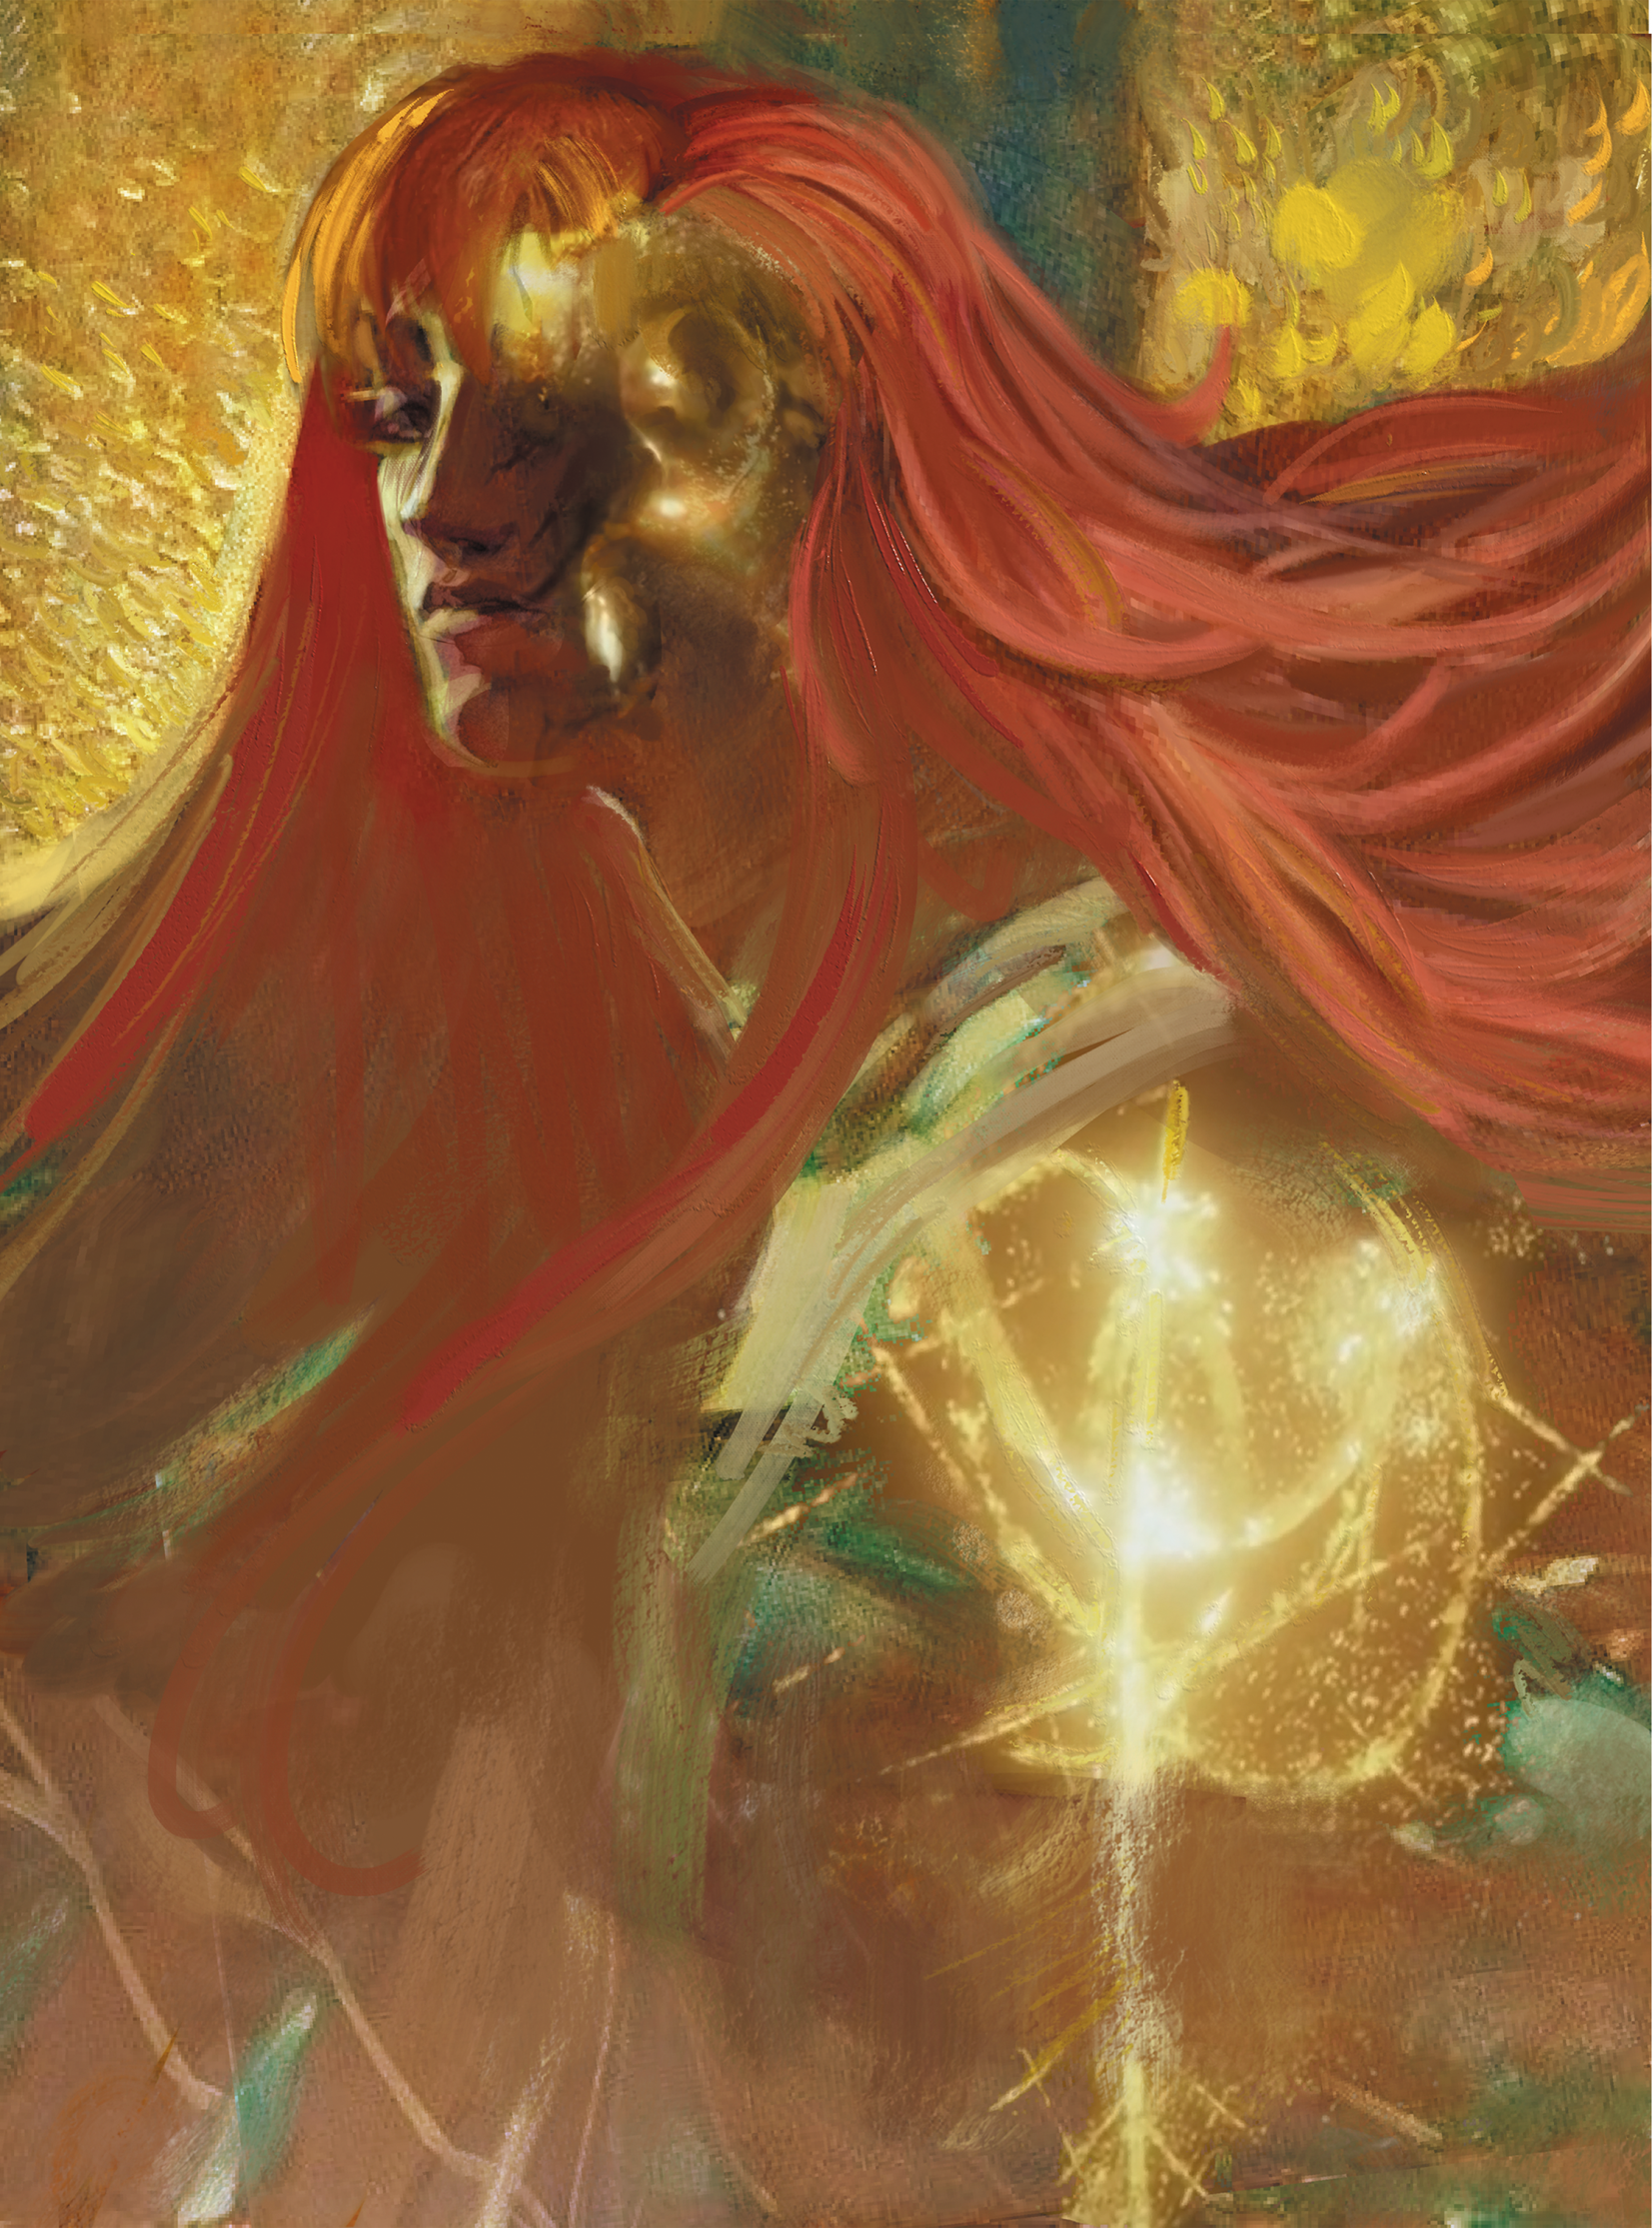 Elden Ring] Radagon Of The Golden Order, an art canvas by Lucifers Choice -  INPRNT